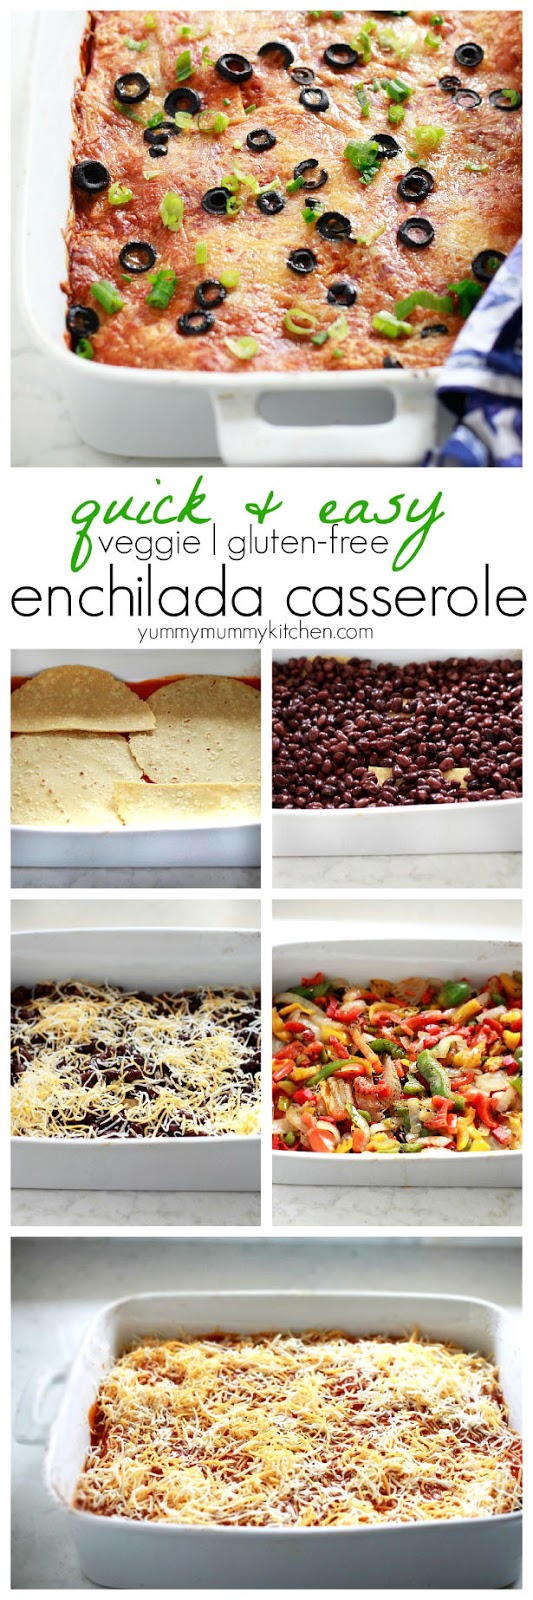 A collage of steps showing how to make an enchilada casserole. Layering beans, tortillas, peppers, and cheese. 